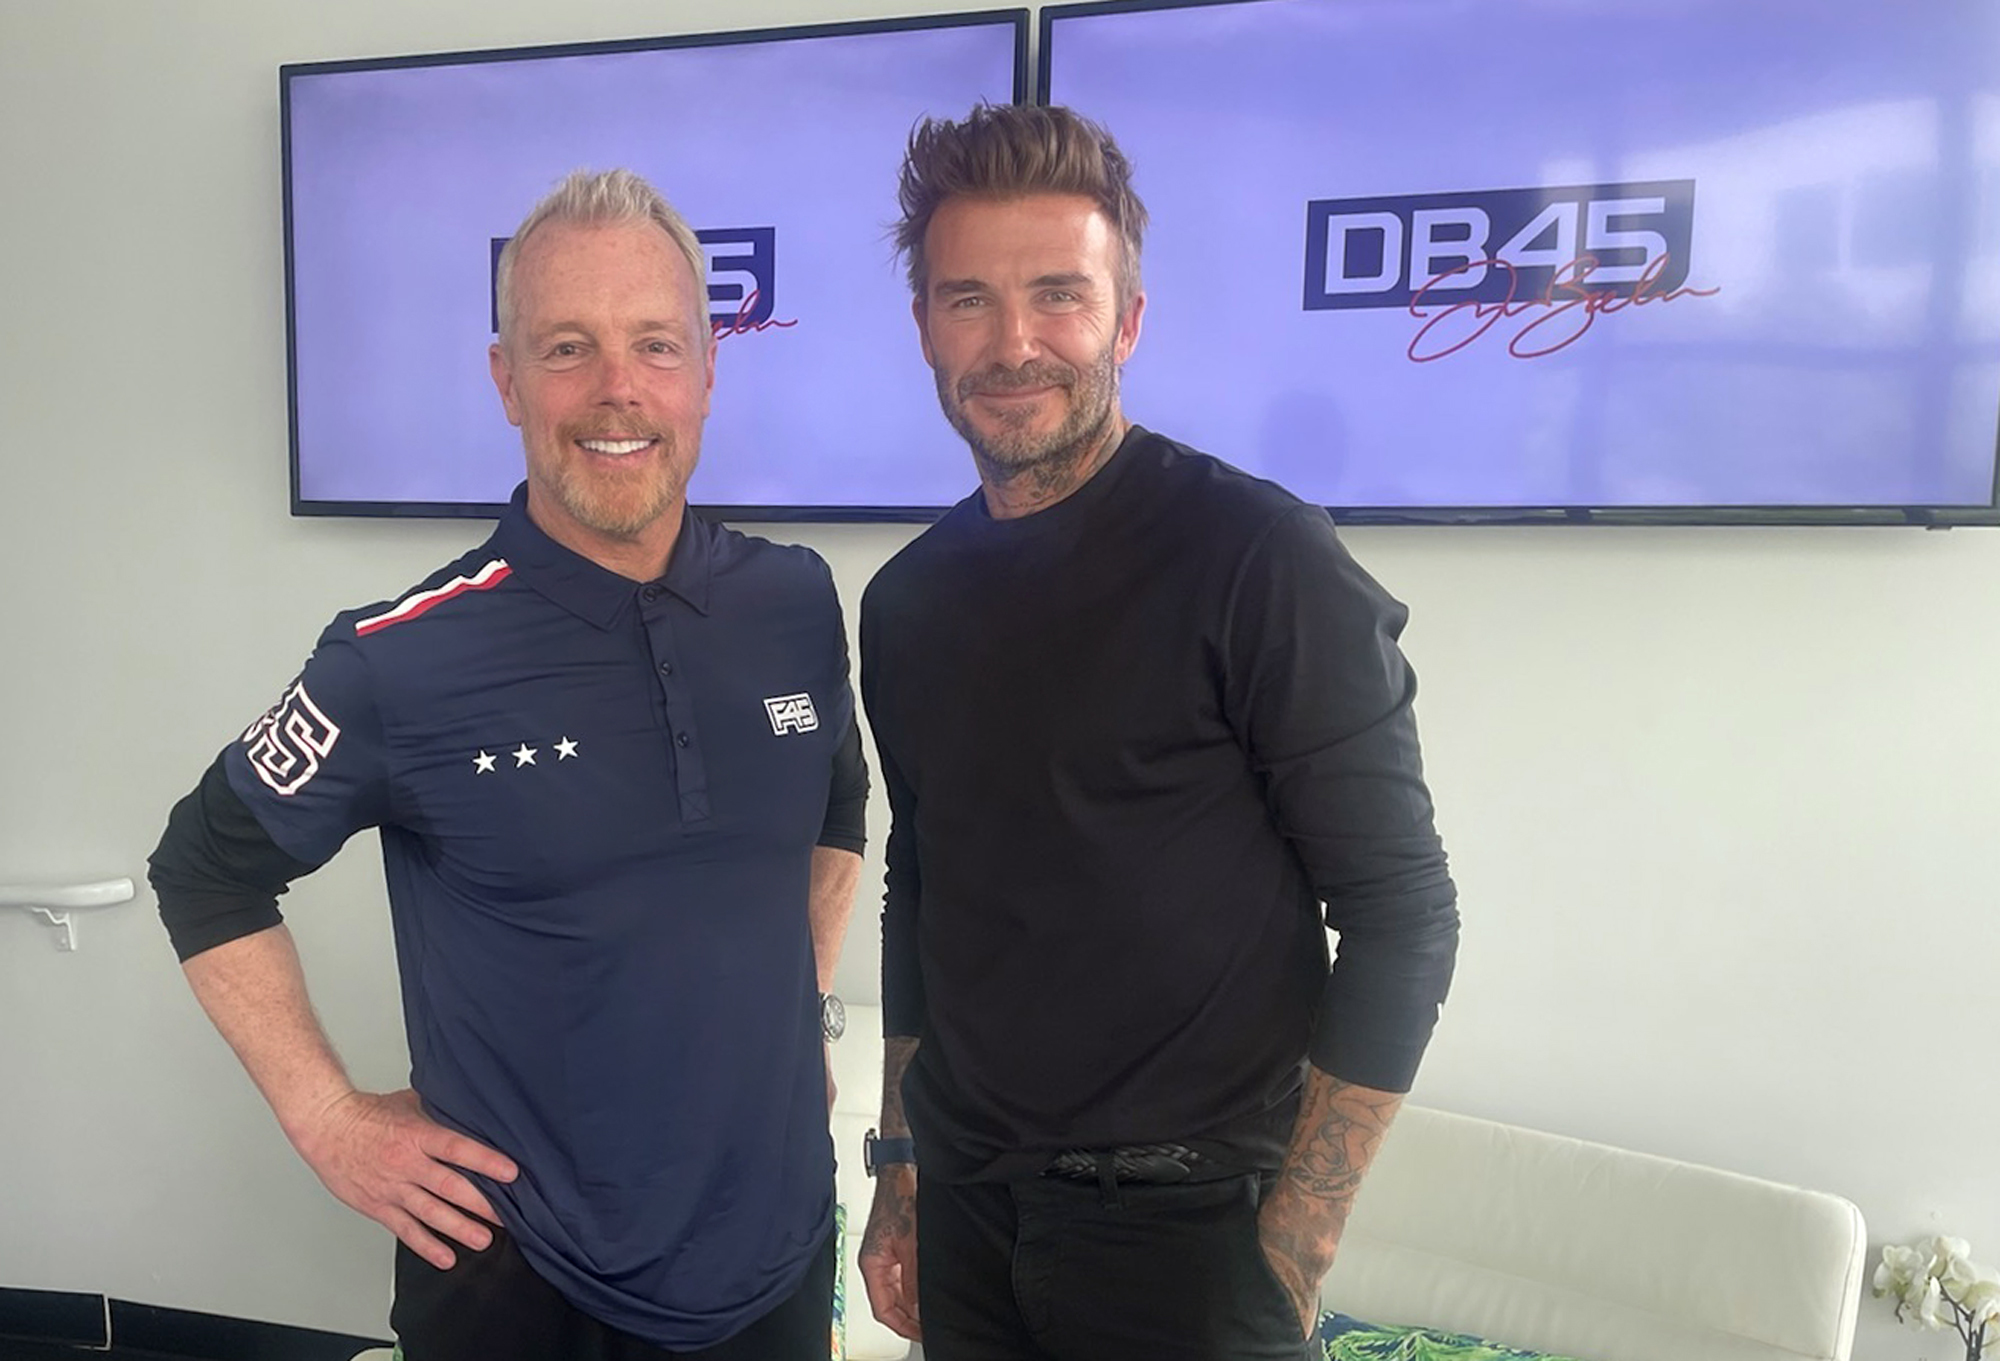 Train Like Beckham: Workout Models Soccer Icon’s Routine